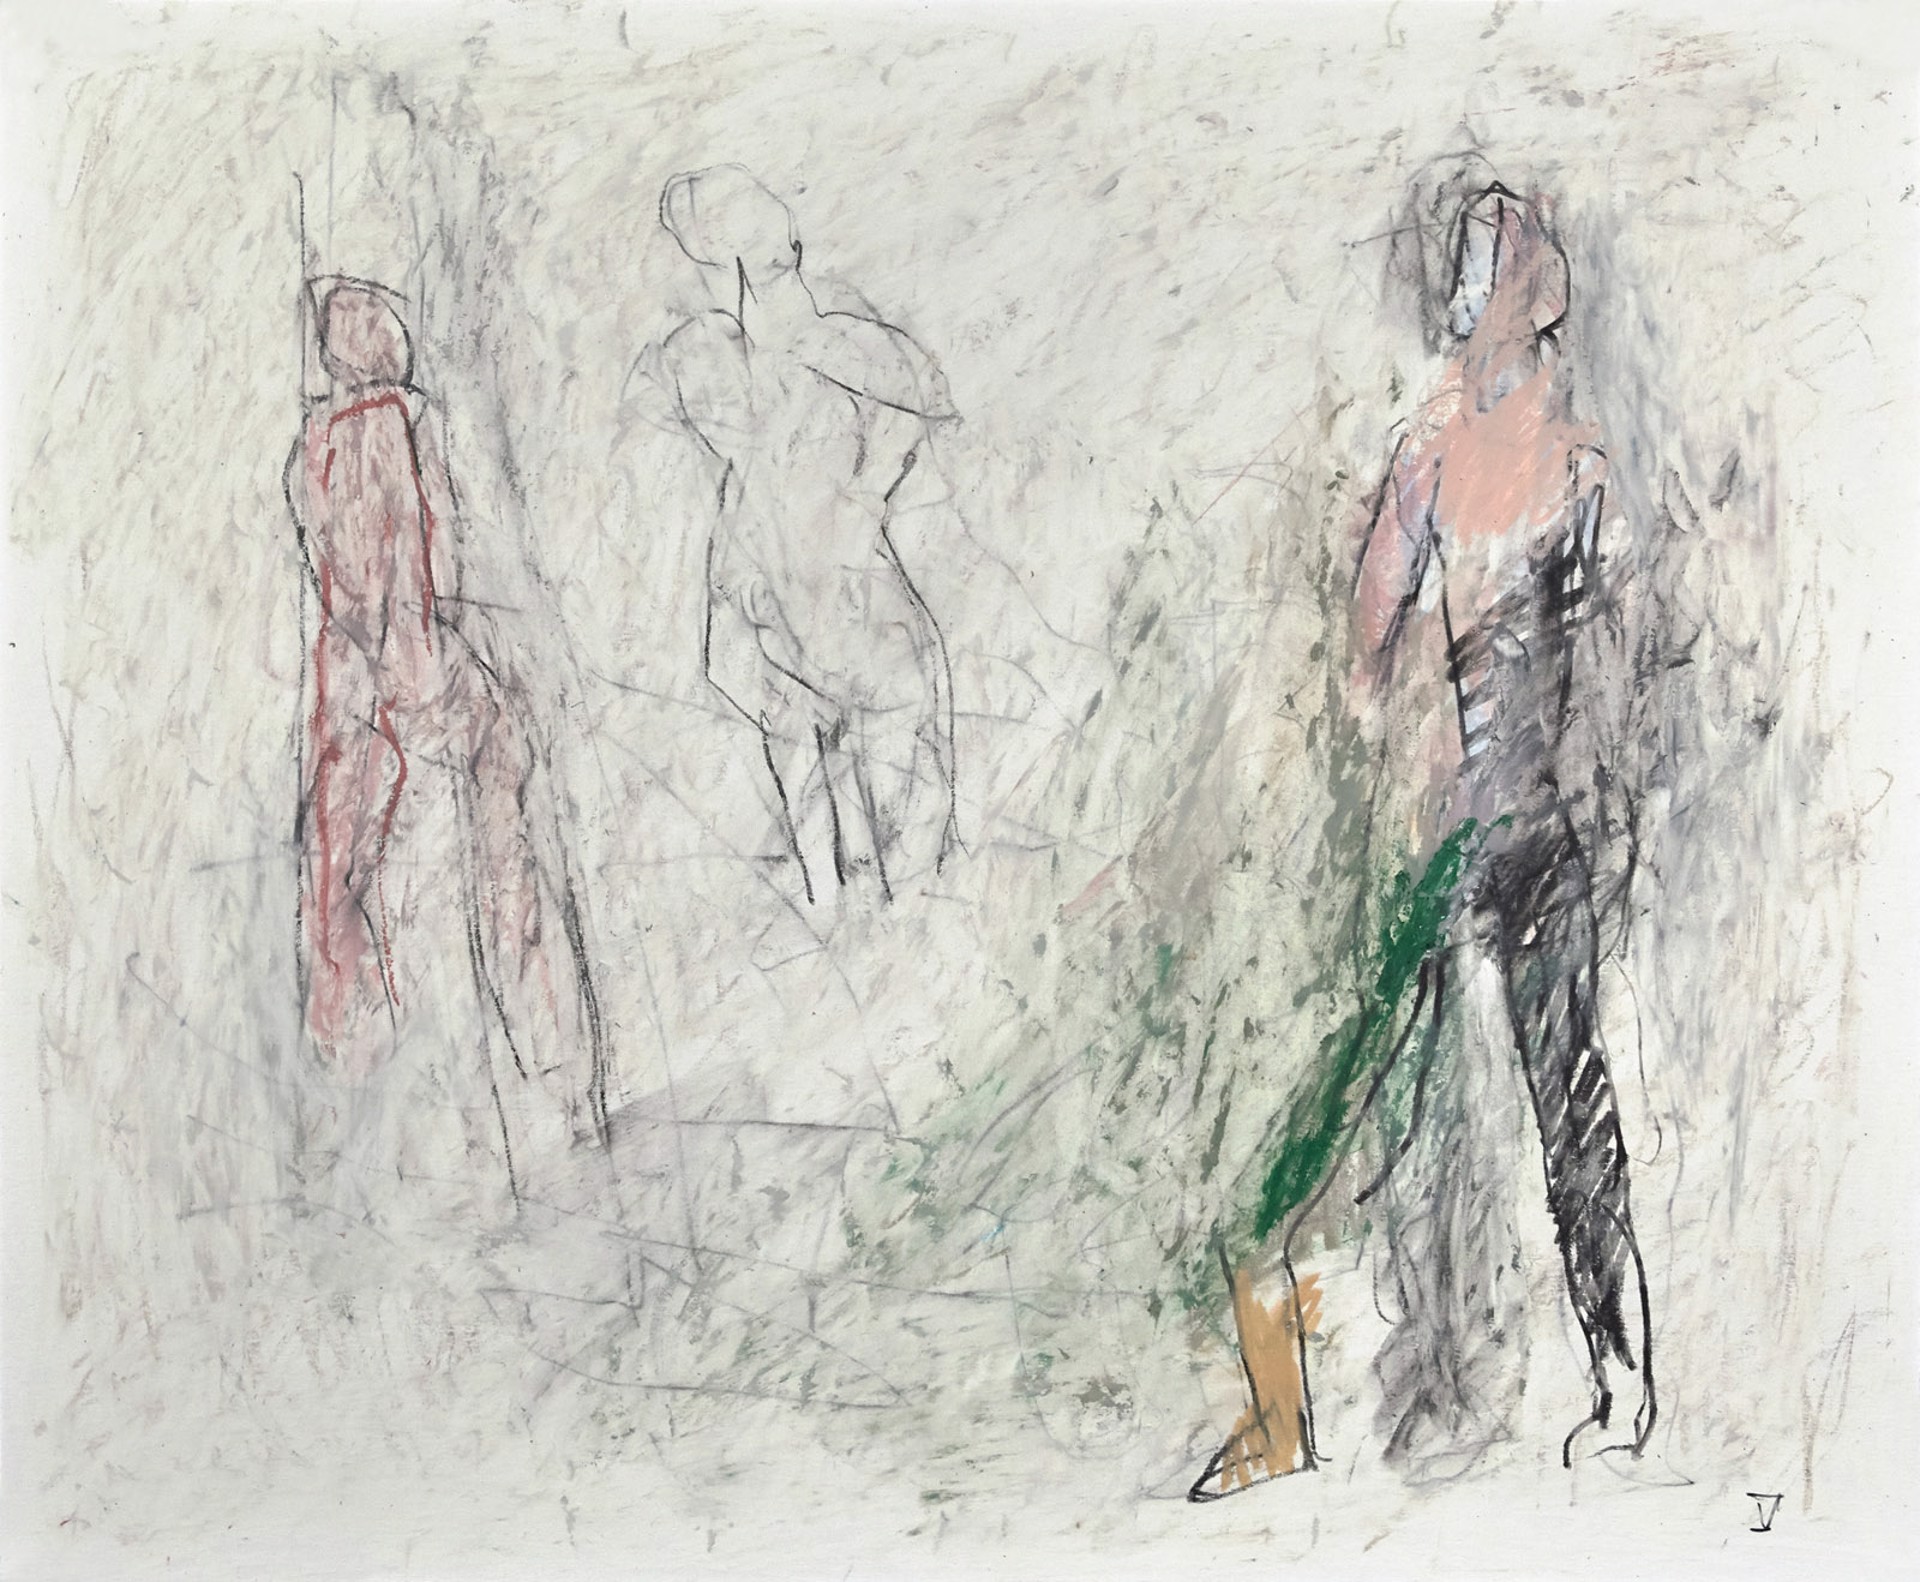 Drawings from Mt Gretna: 3 Figures with Green and Pink by Thaddeus Radell